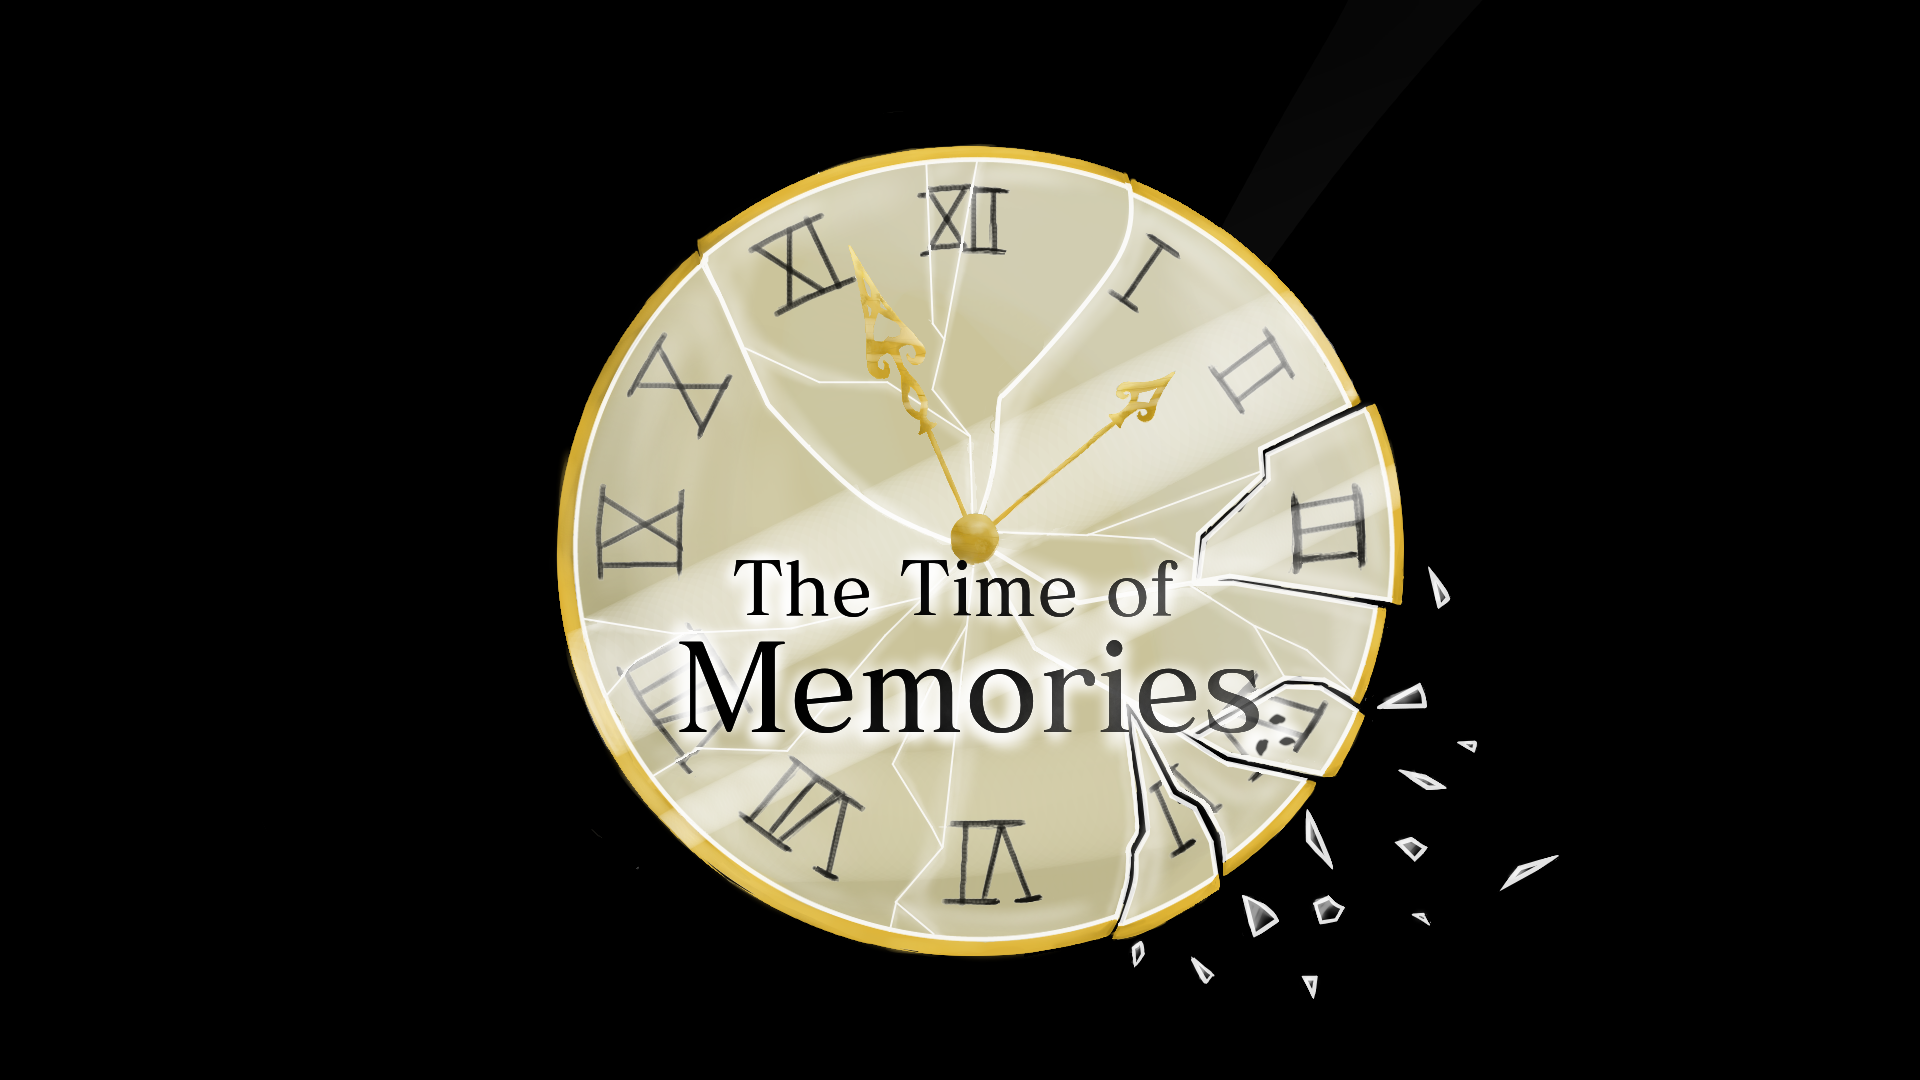 The Time of Memories